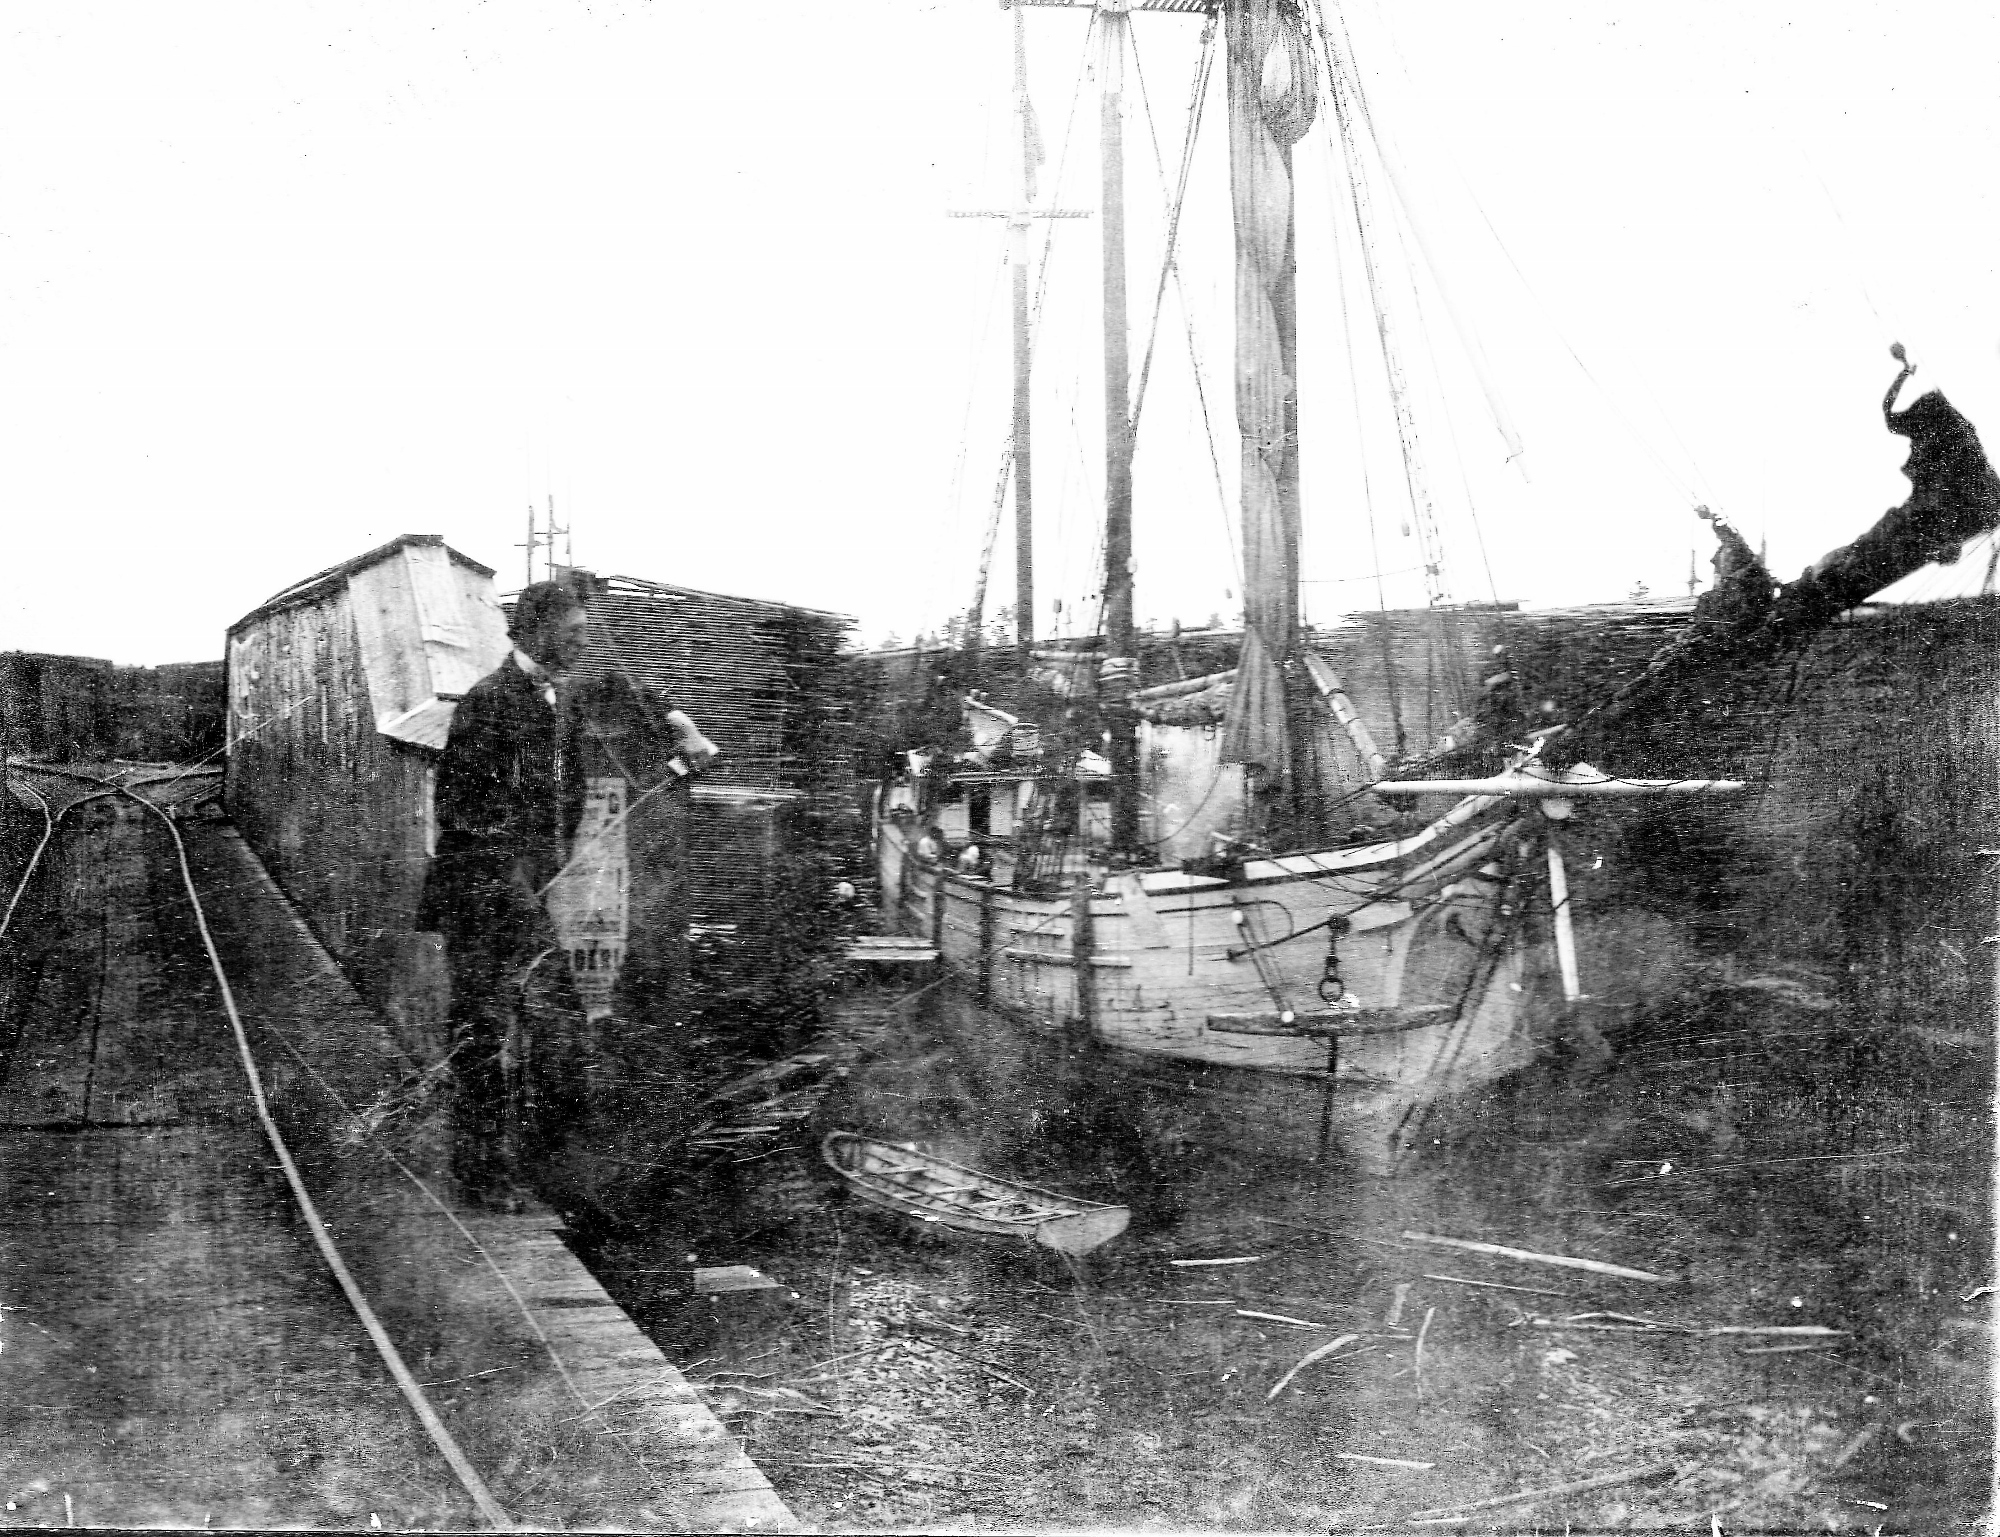 The above photo shows one of Bundy’s Gospel ships docked in the slips of Manistique Harbor – G. Leslie Bouschor Collection 